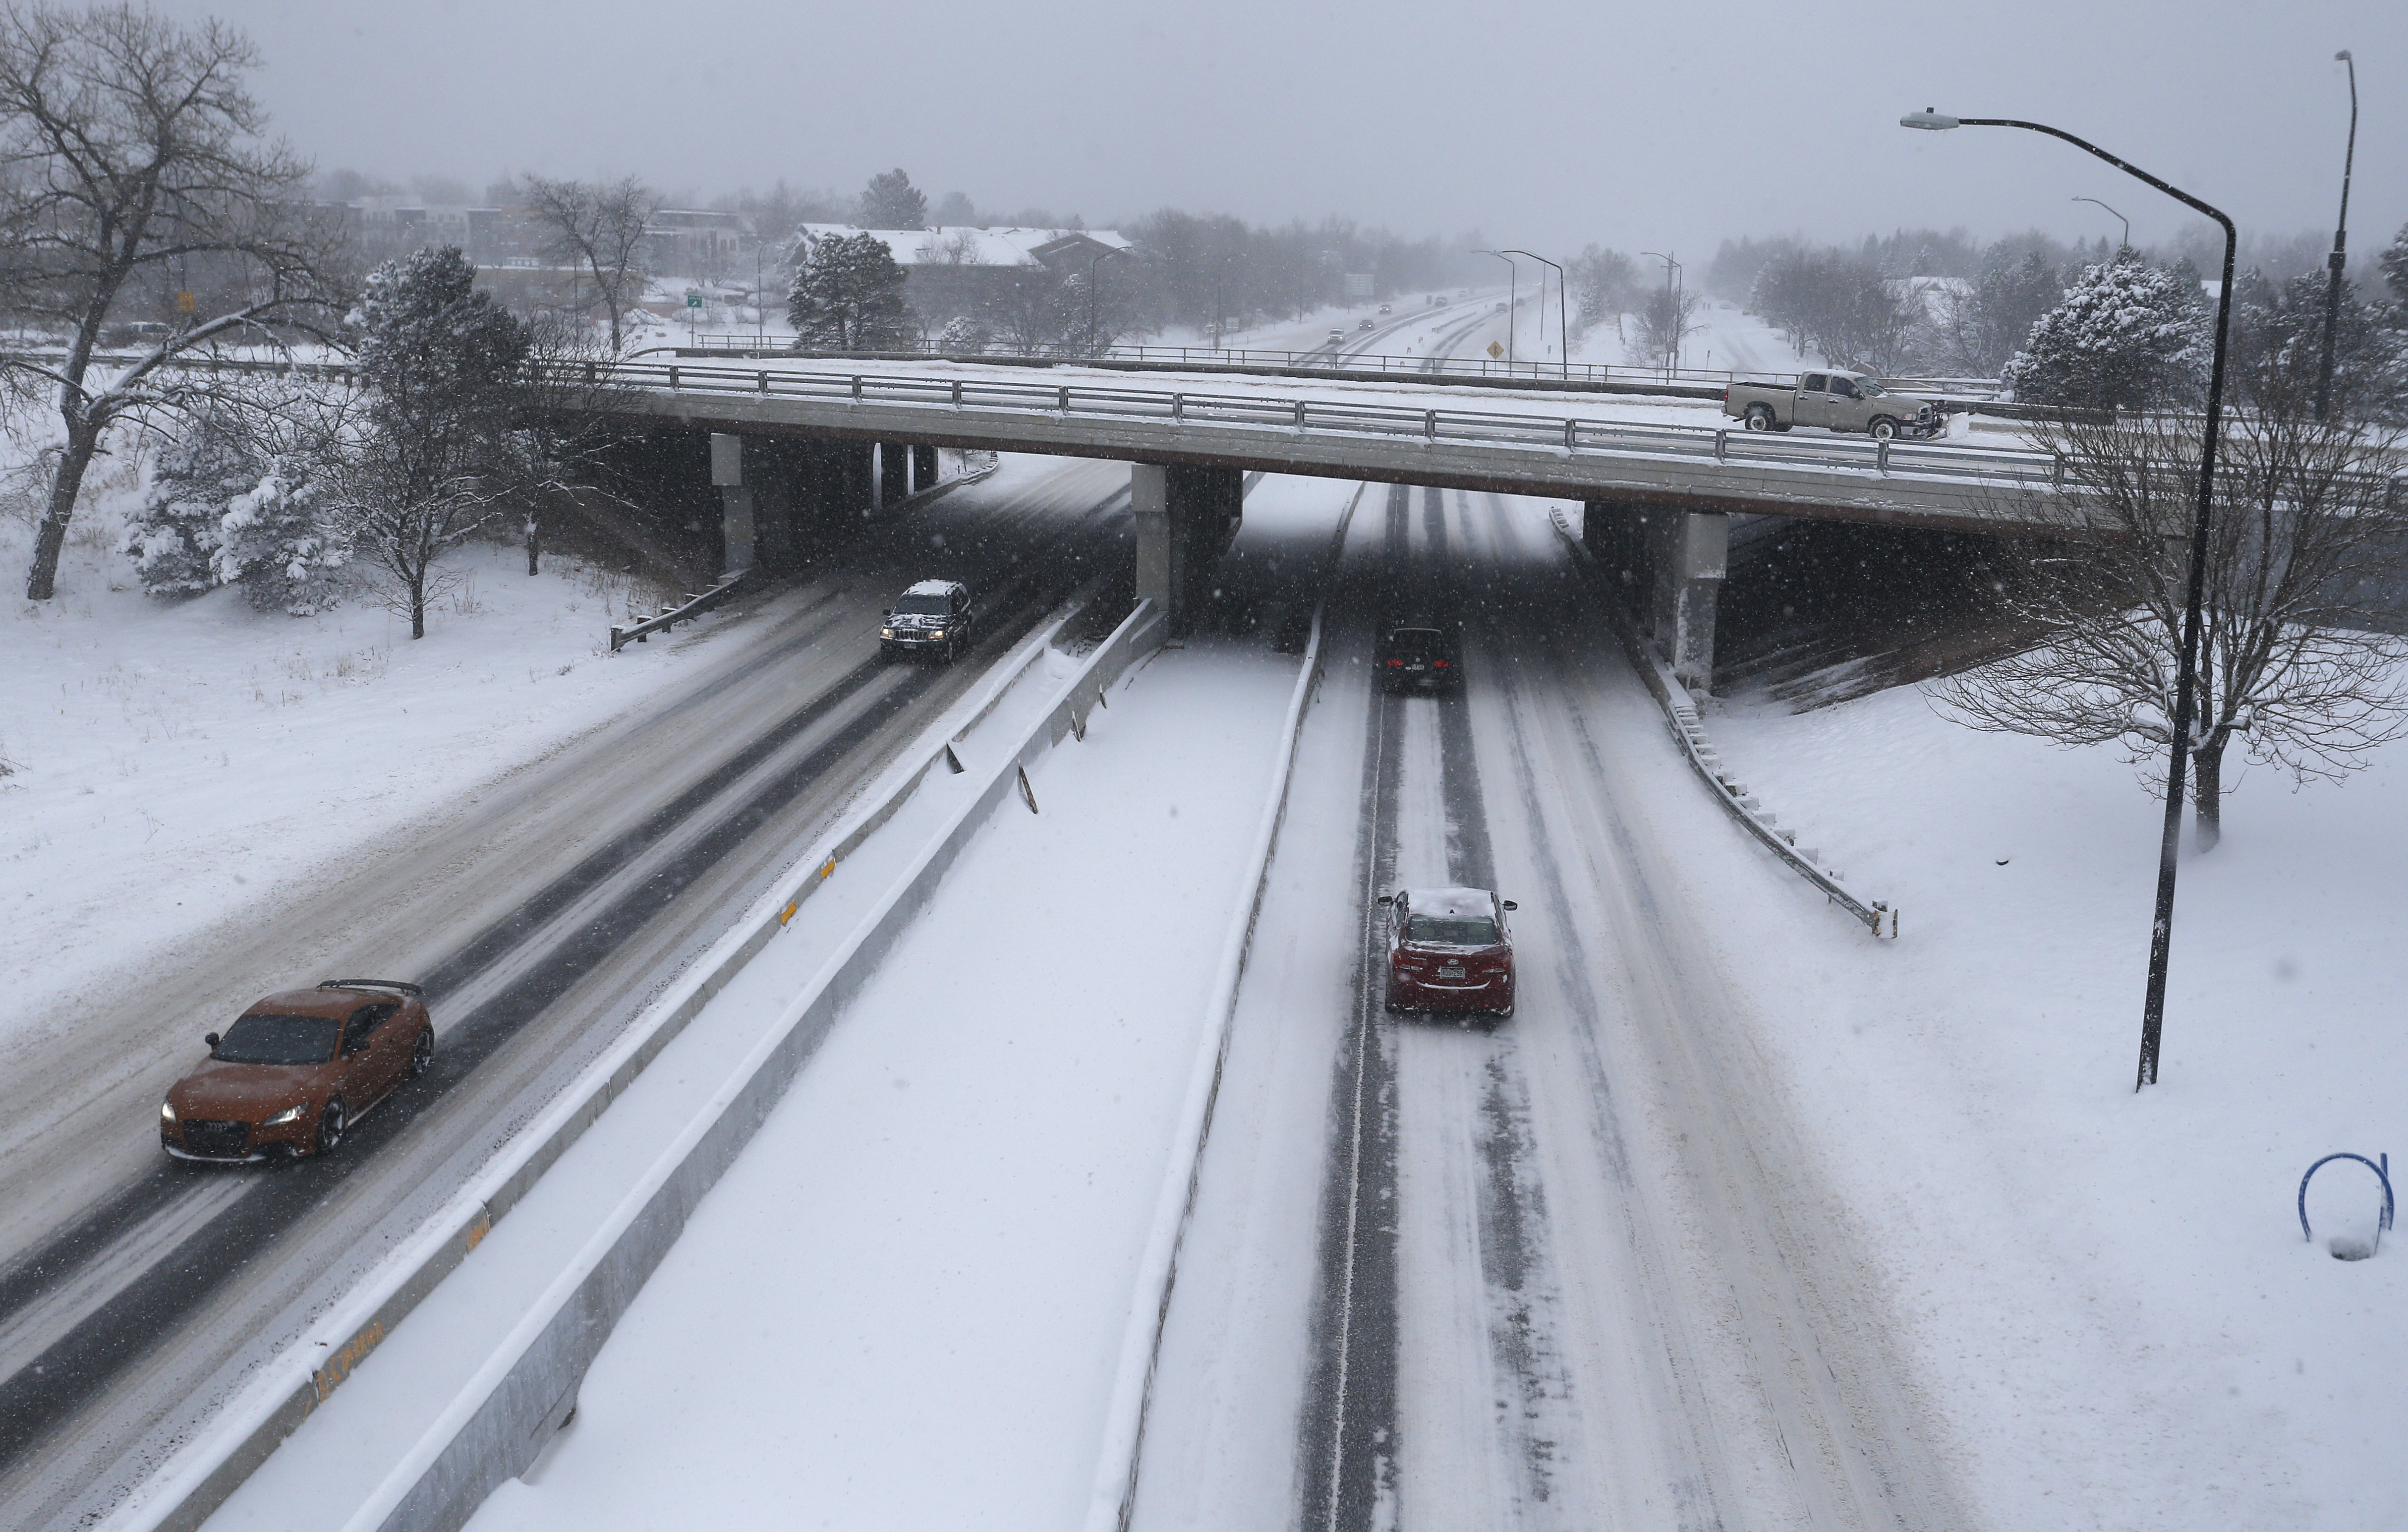 Motorists brave slippery roads after a night of heavy snowfall, in Boulder, Colo., Tuesday, Dec. 15, 2015. The biggest winter storm to hit the Denver area so far this season has left most schools closed and created some havoc on the roads for those forced to commute. (AP Photo/Brennan Linsley)